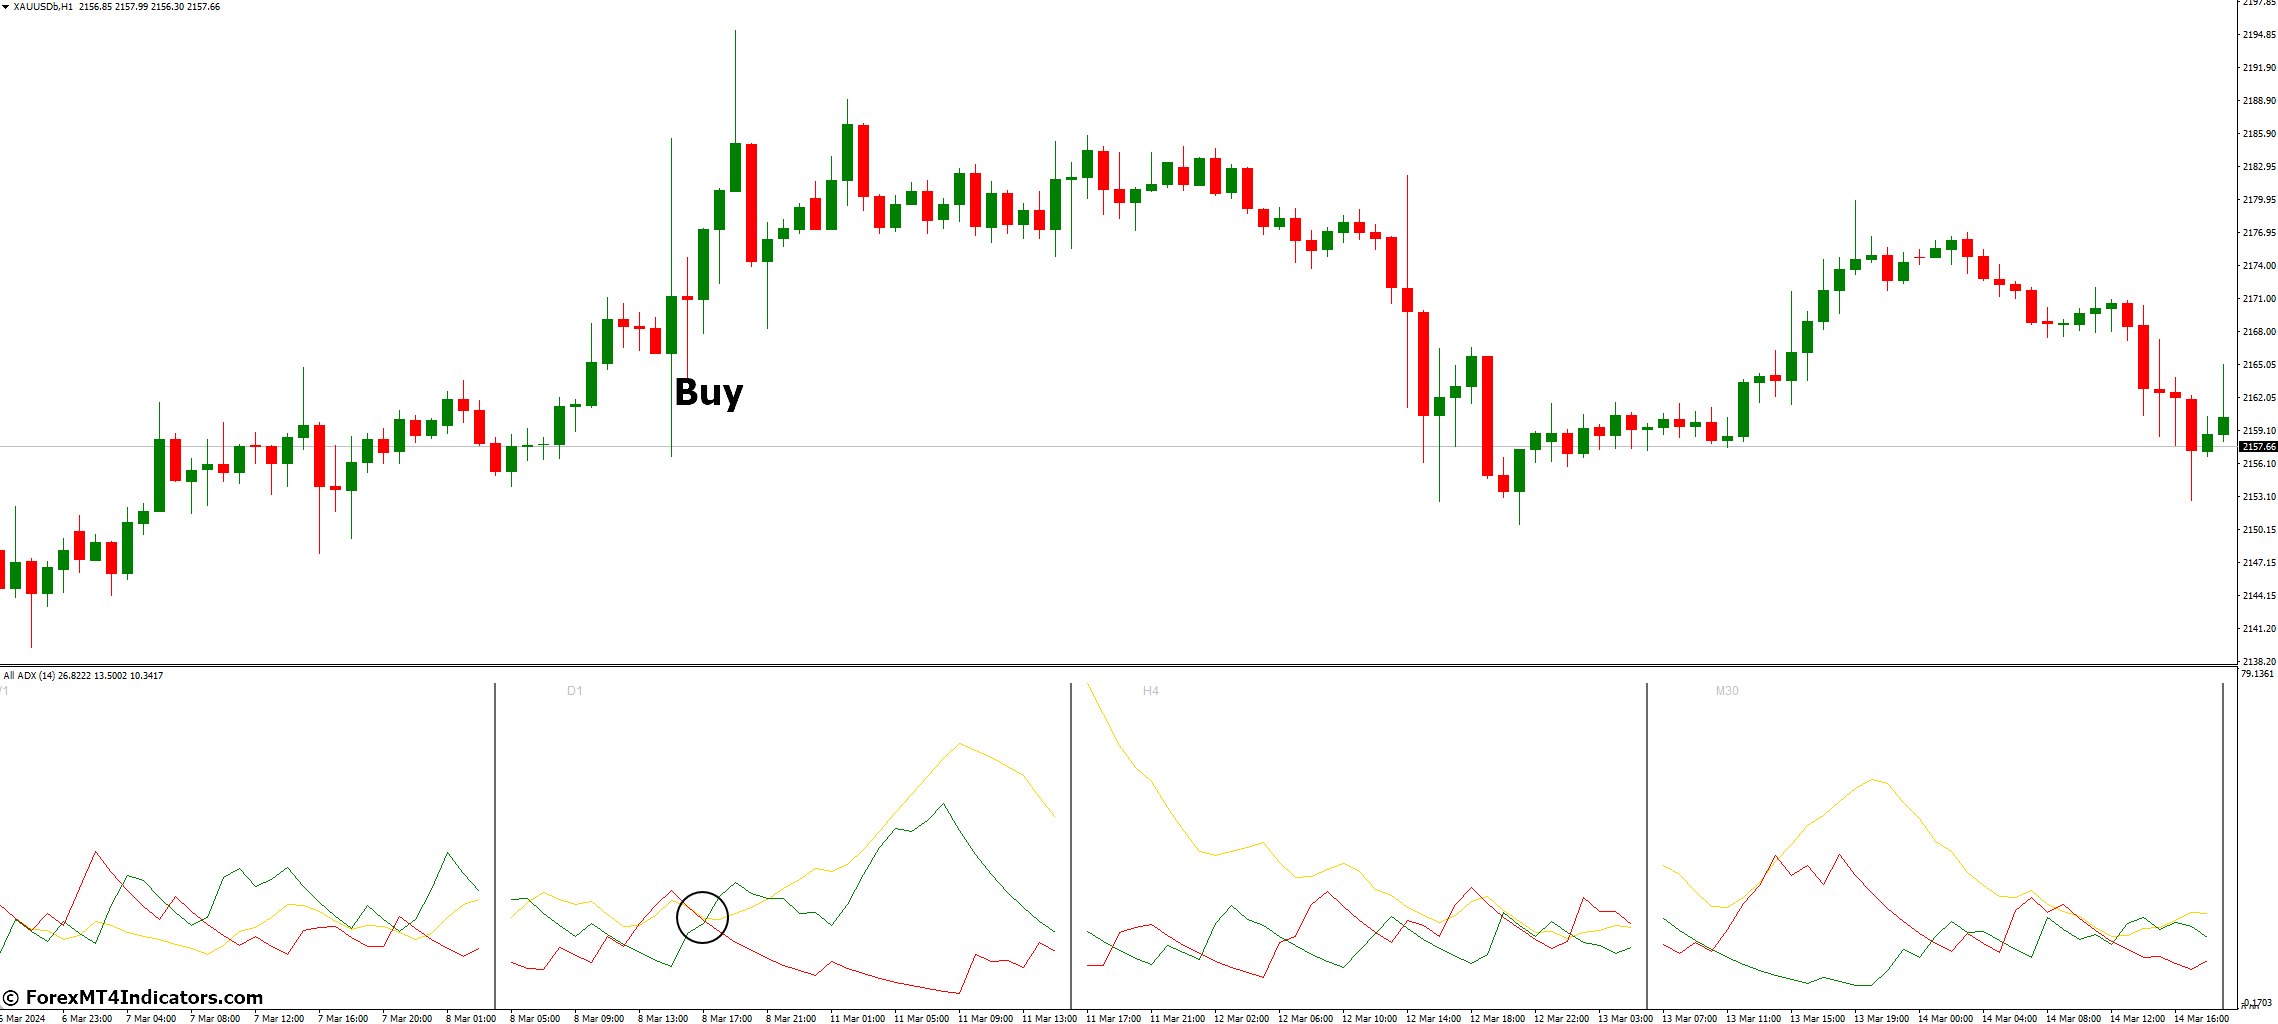 How to Trade with All ADX Indicator - Buy Entry